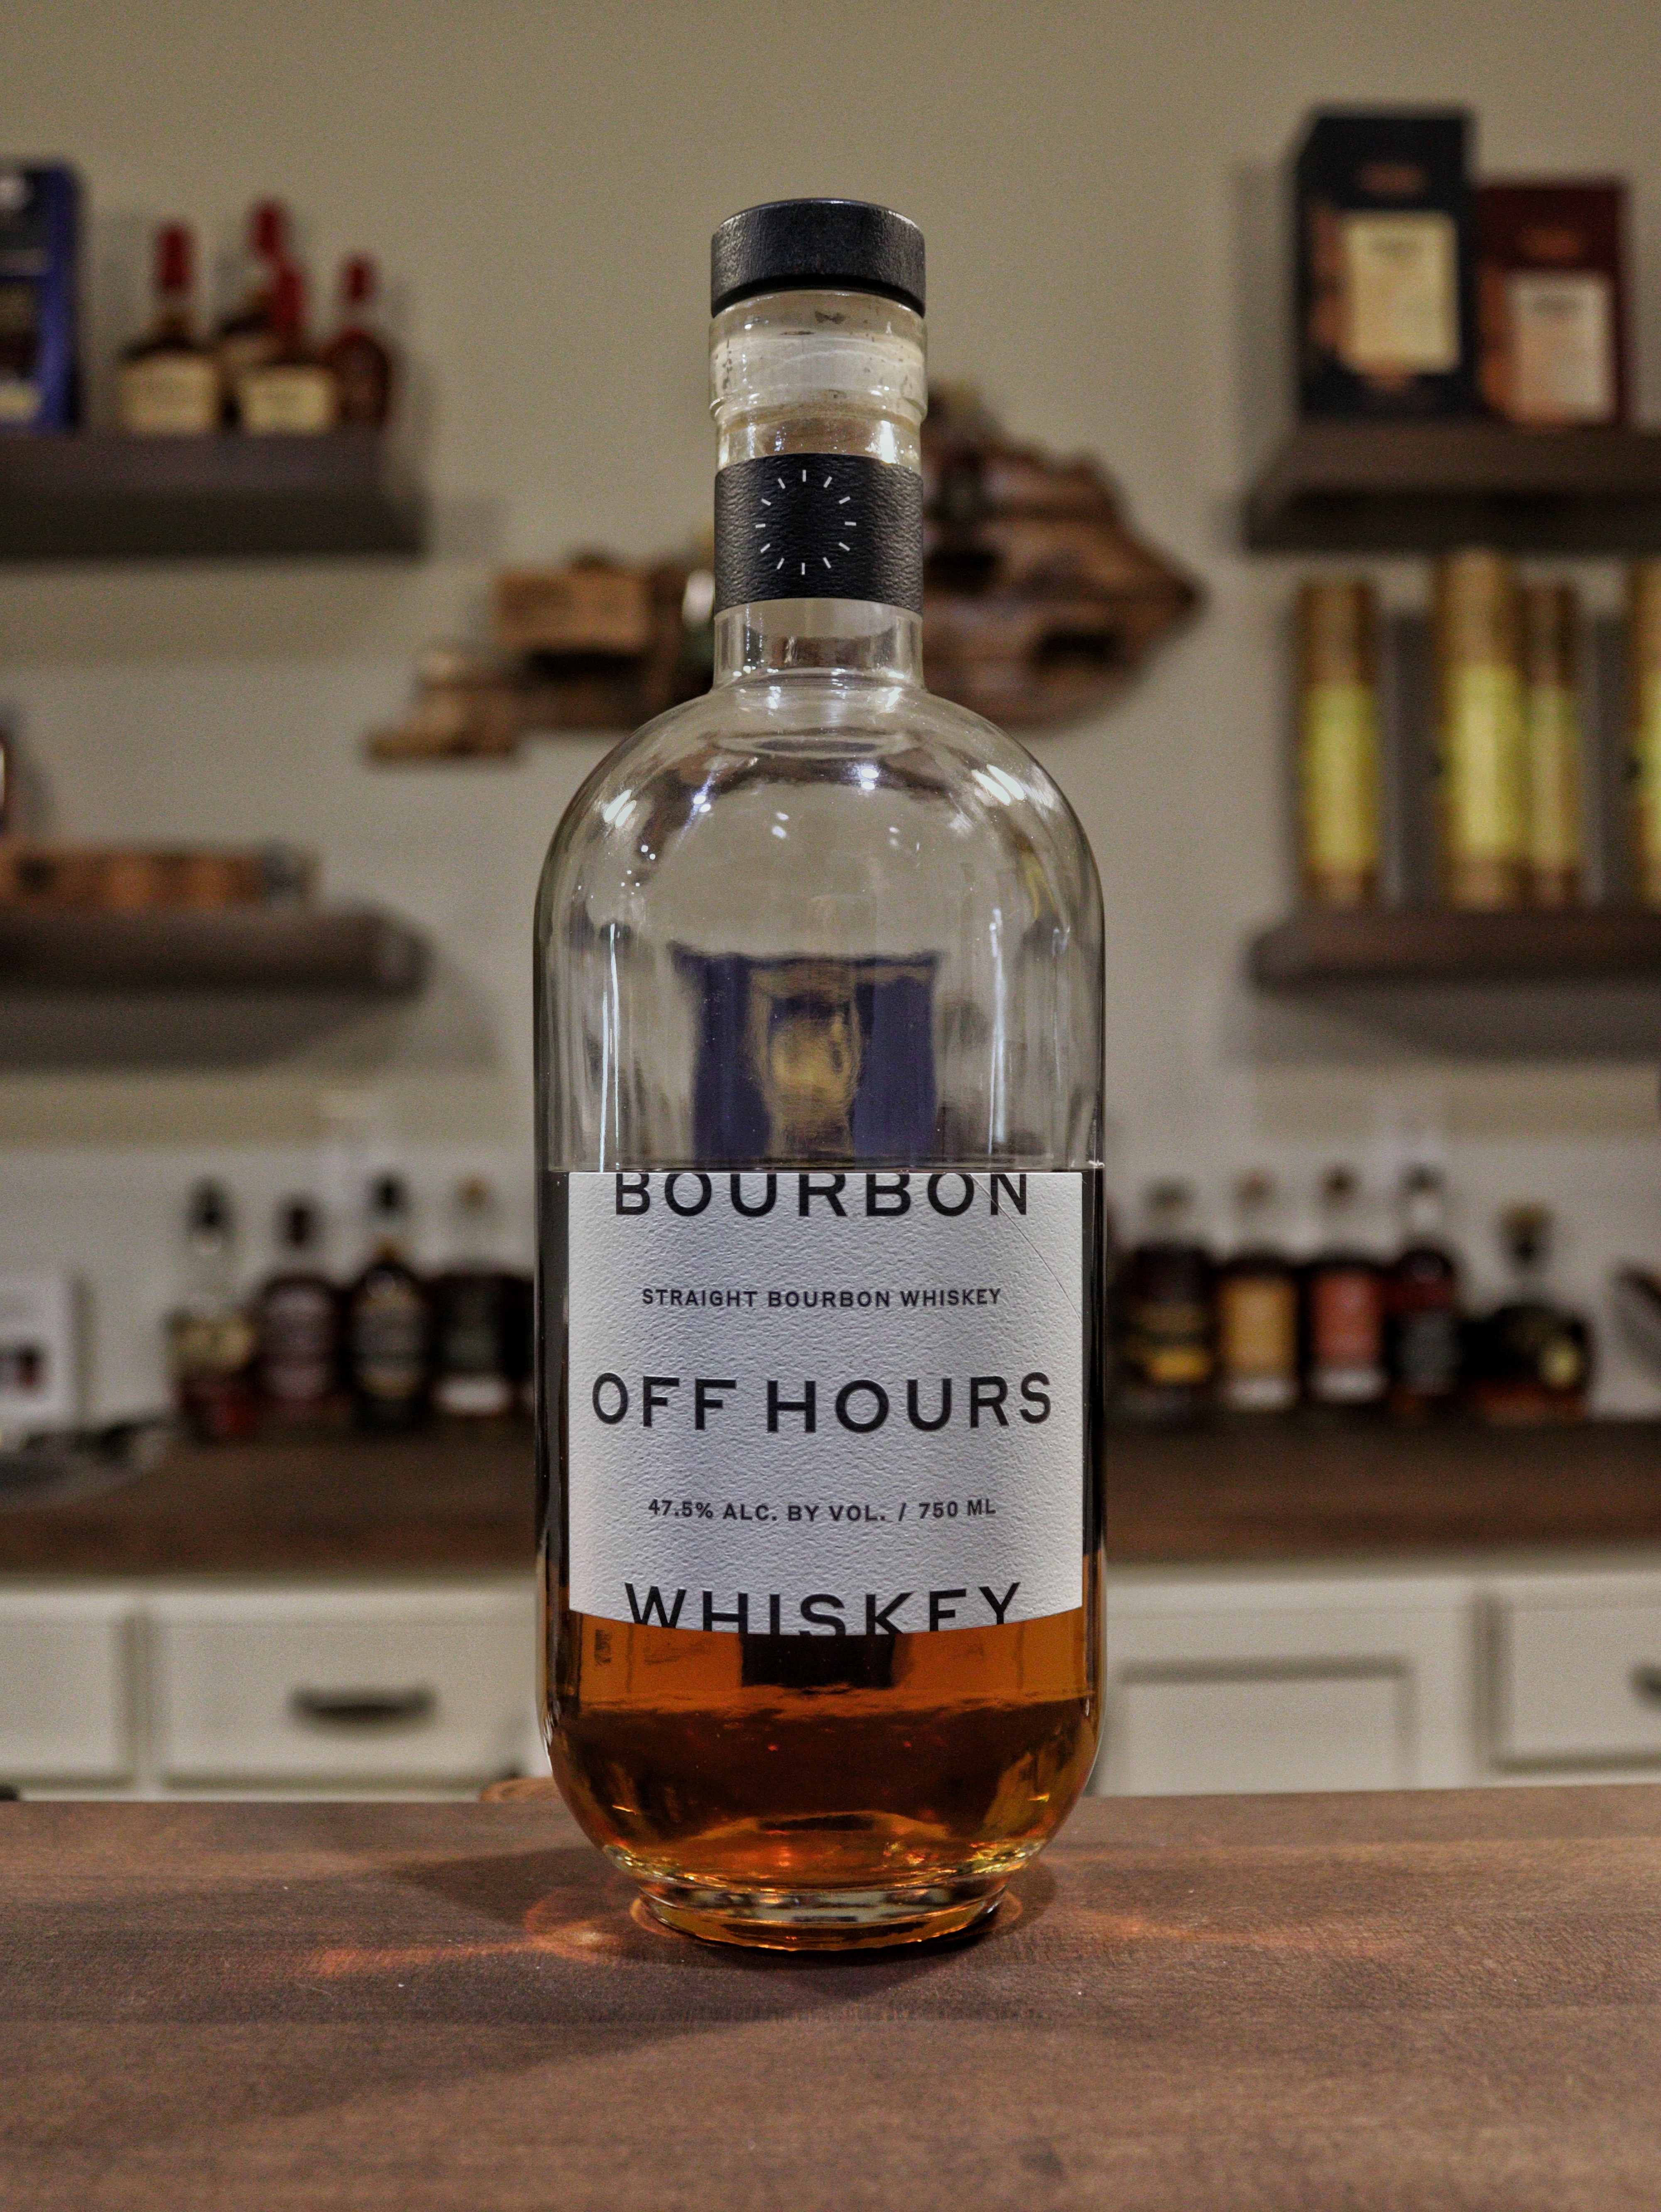 Have You Tried Off Hours Bourbon?